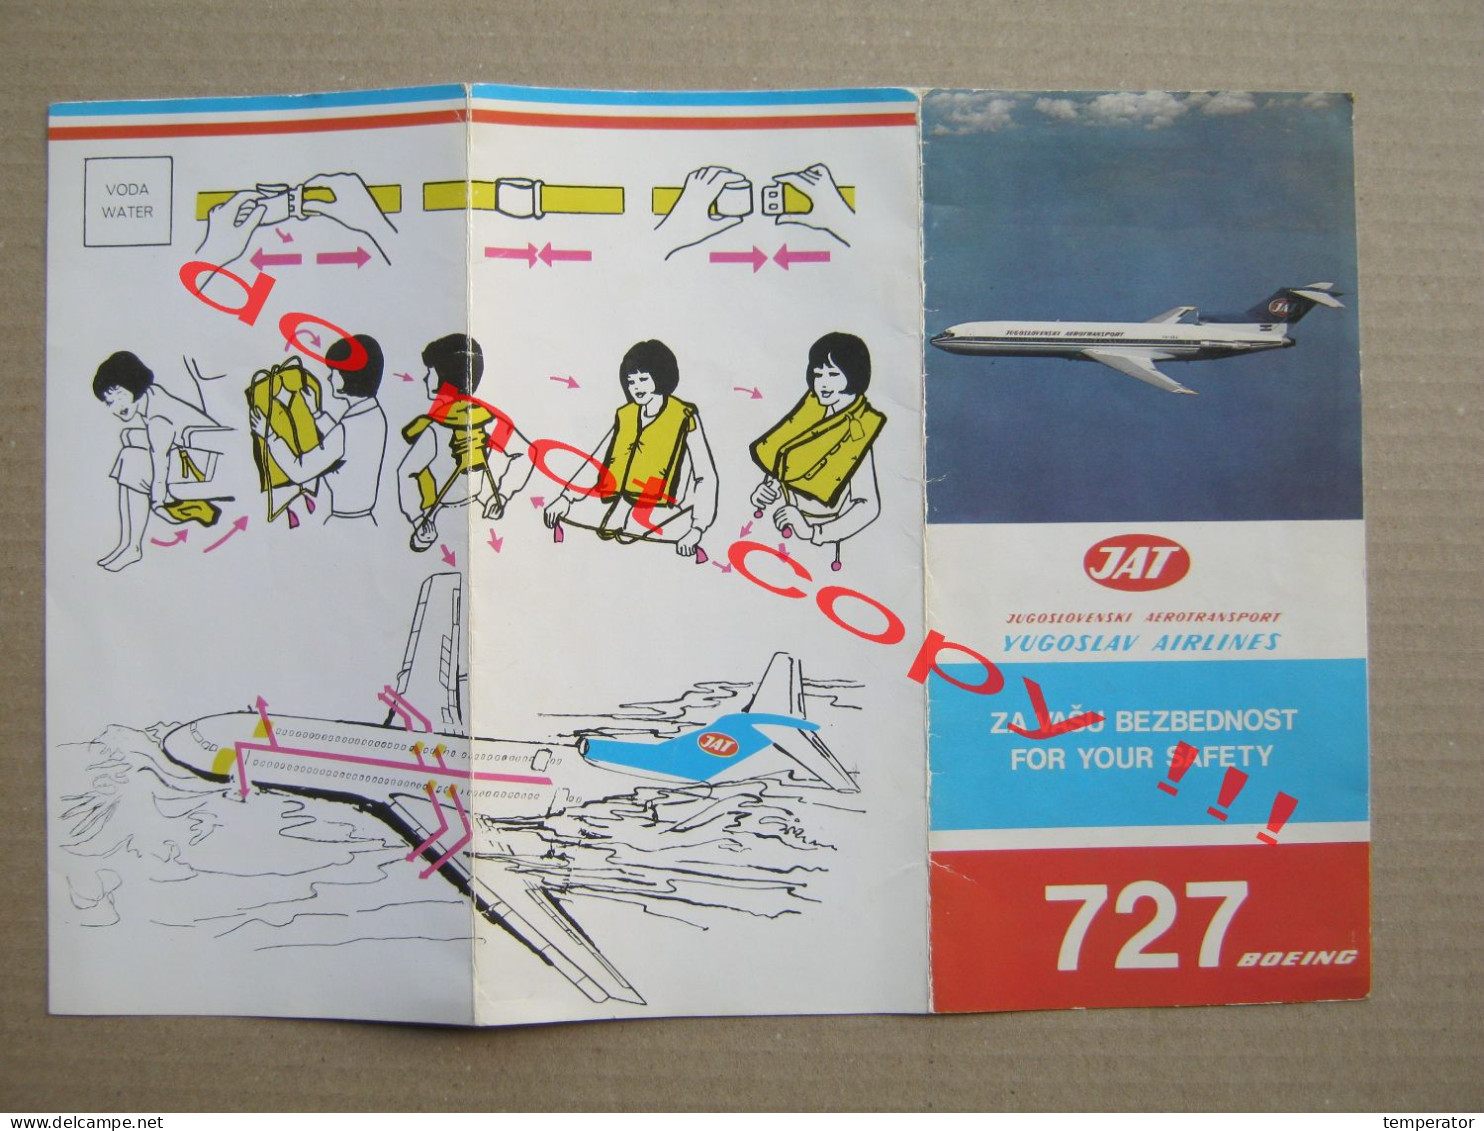 JAT YUGOSLAV AIRLINES - 727 BOEING ( FOR YOUR SAFETY ... ) - Pubblicità